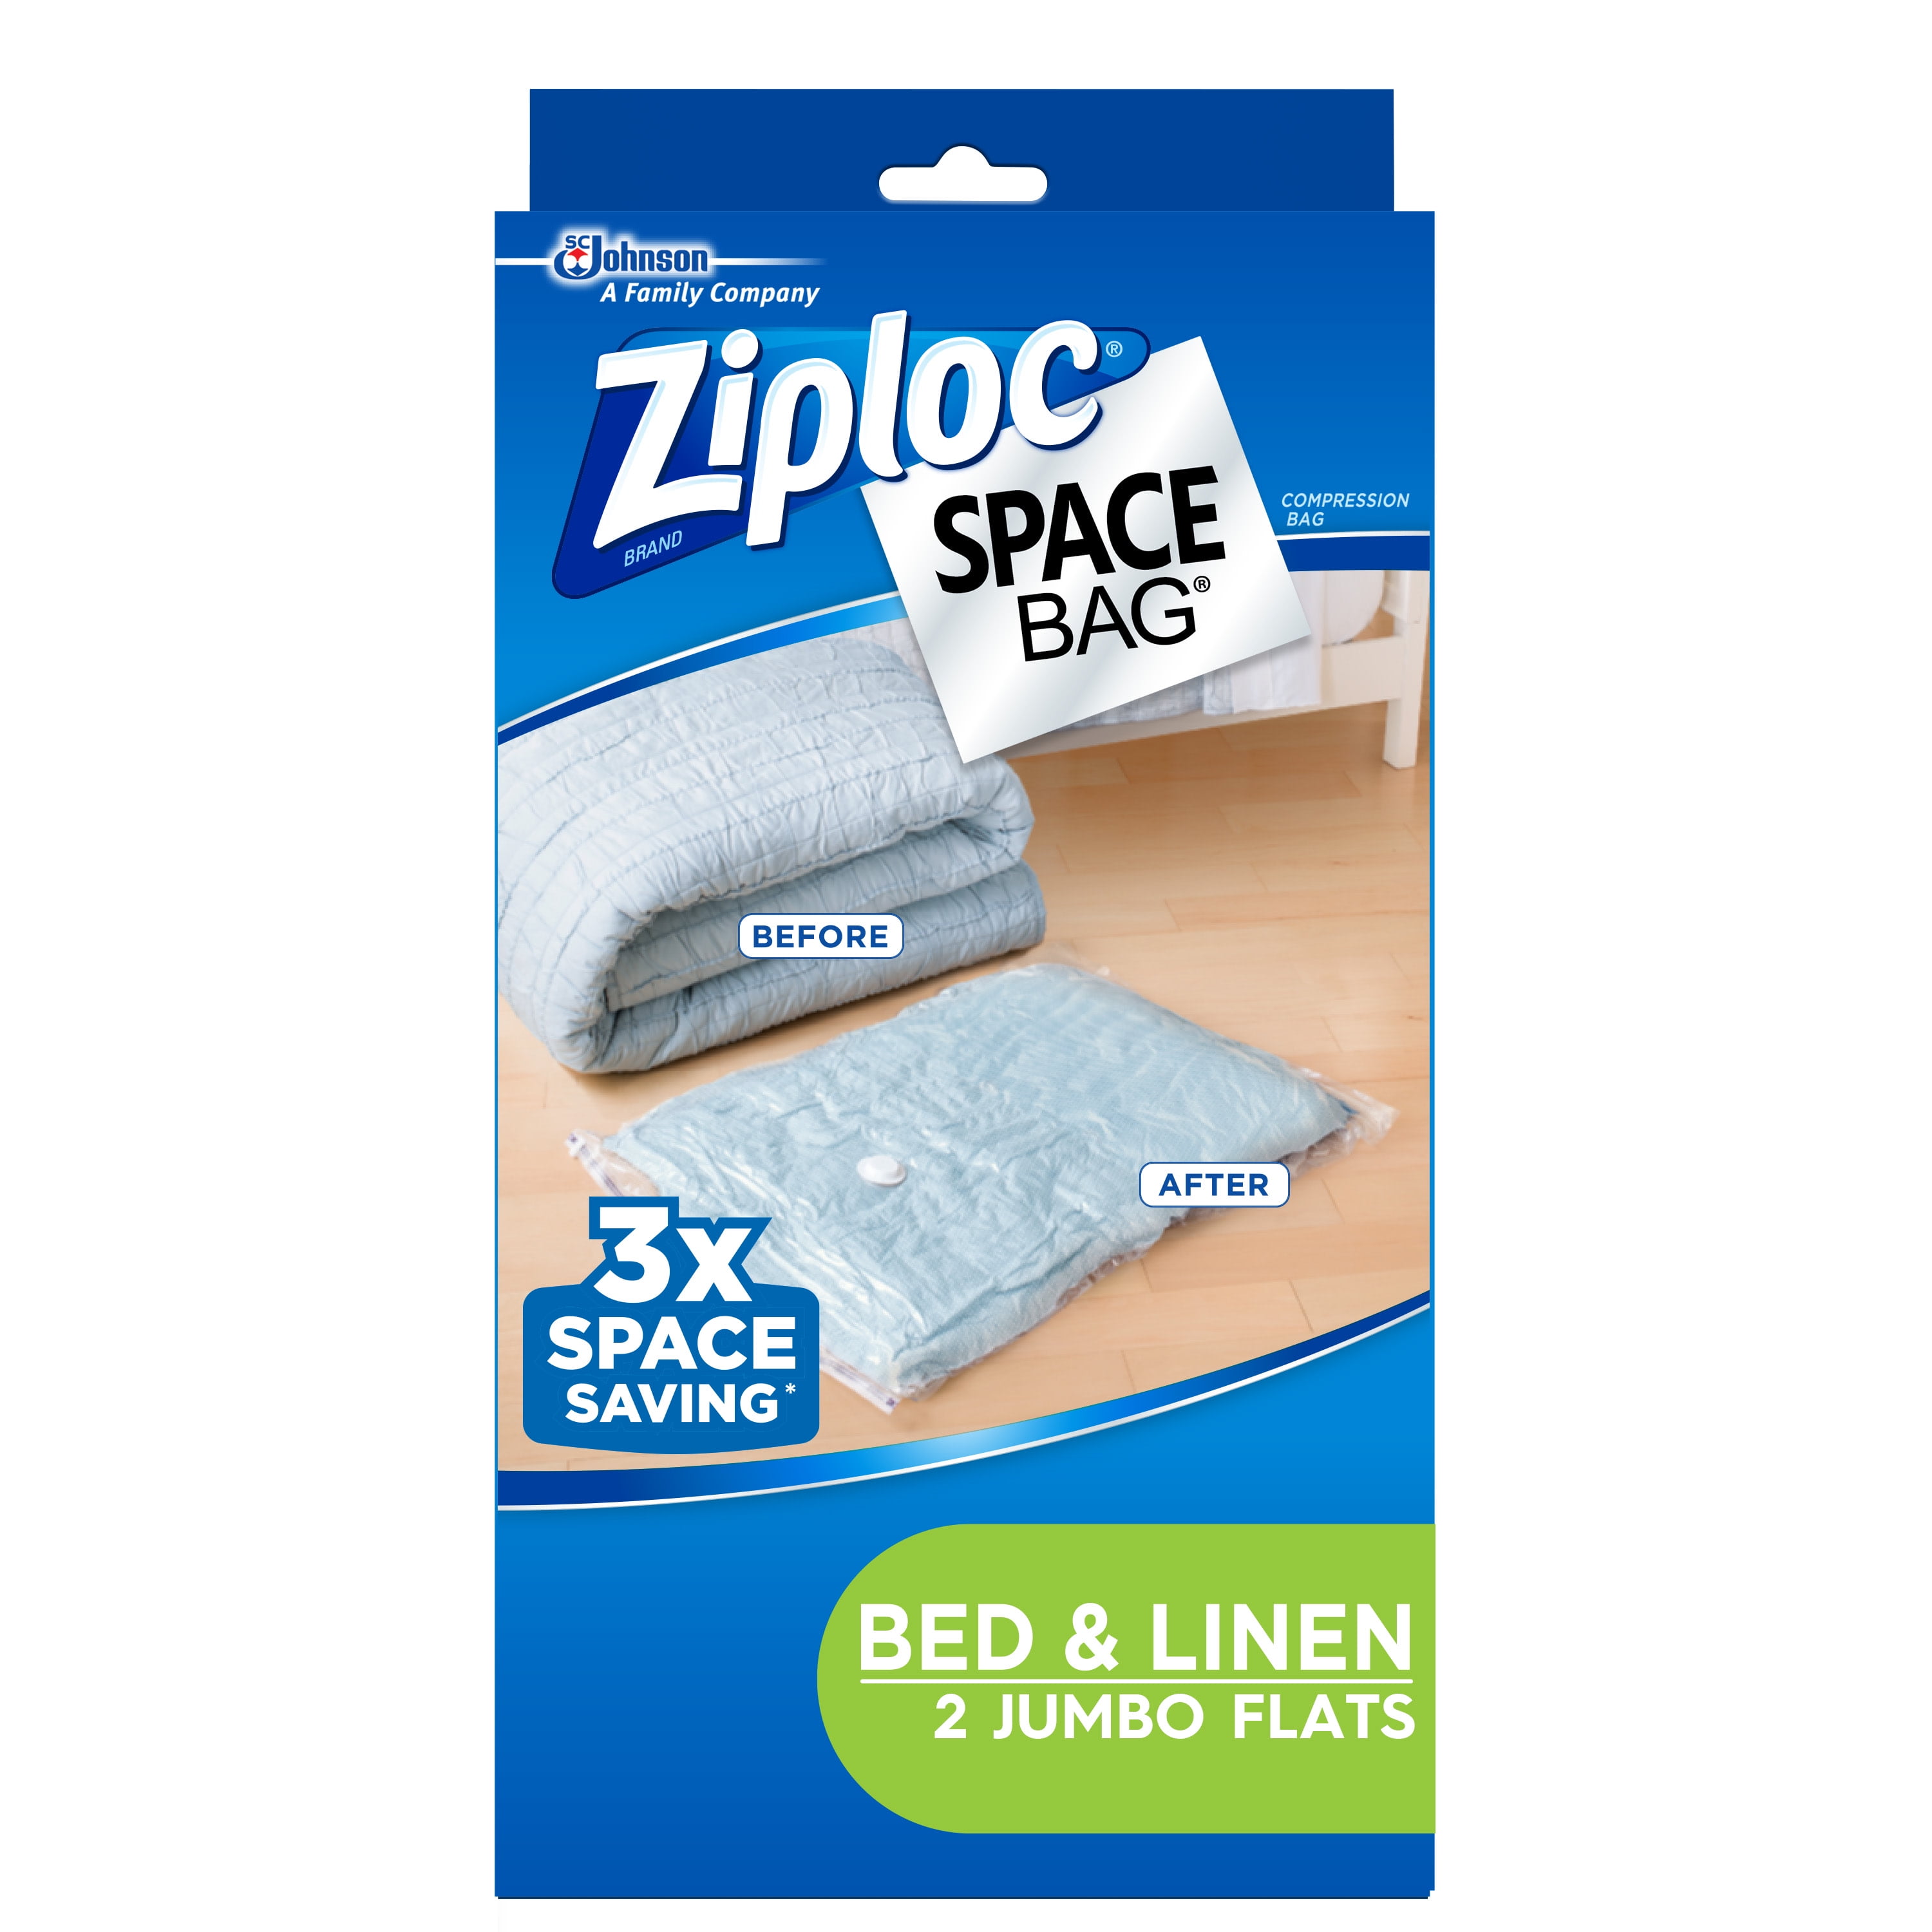 Ziploc Space Bag 5 Count 4l Flat Bags 1 Underbed Tote for sale